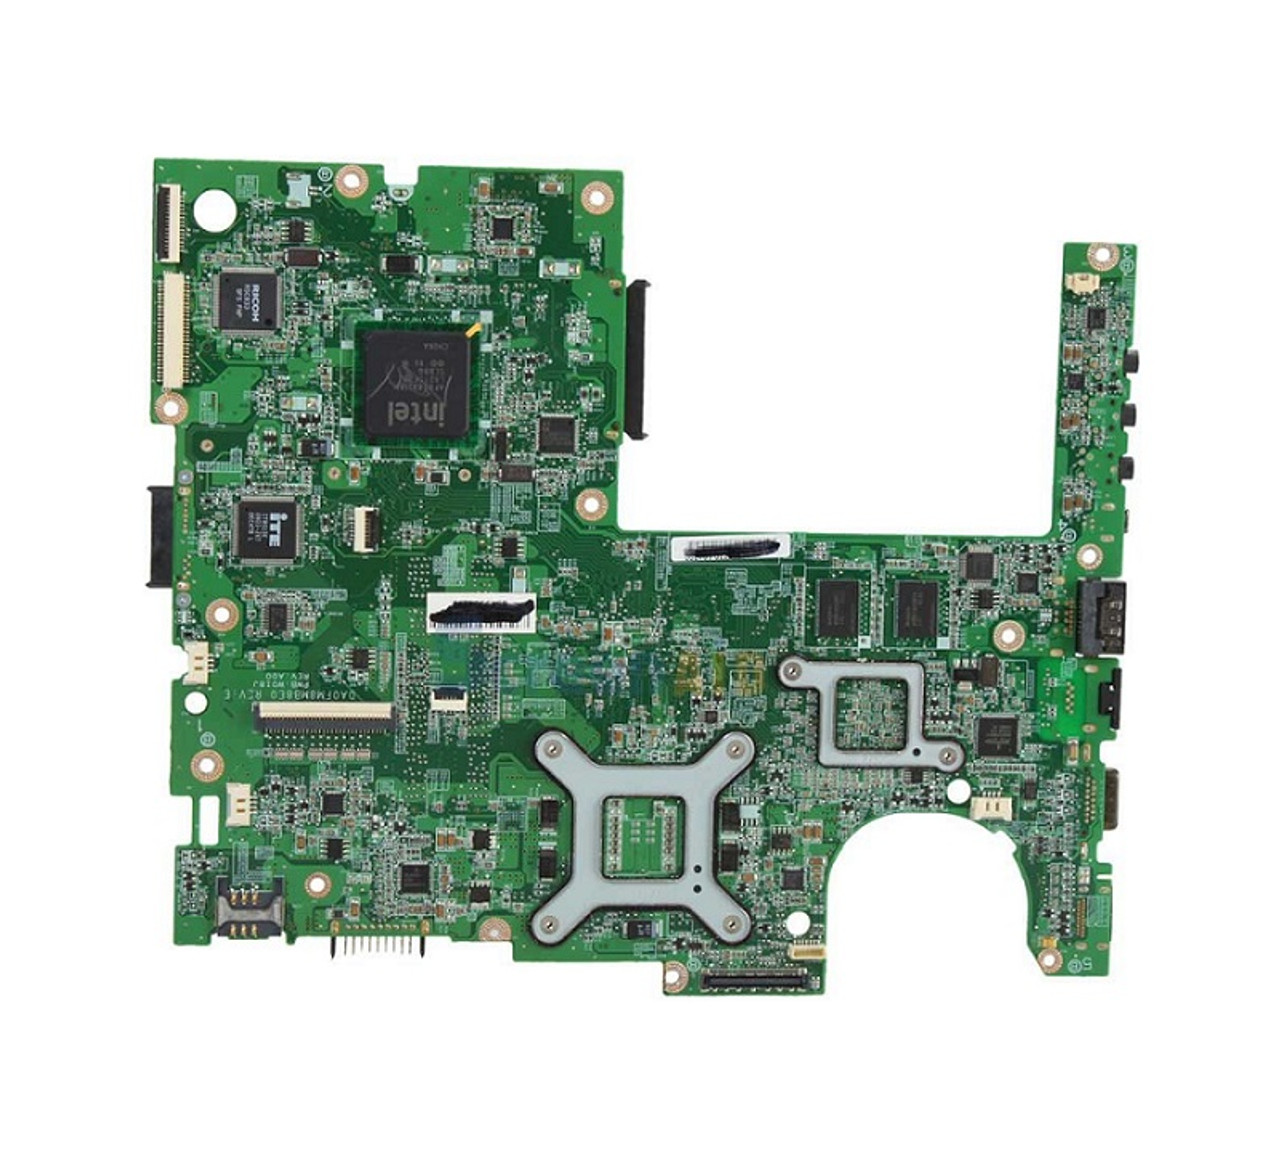 609234-001 - HP System Board (MotherBoard) for Presario CQ42 / CQ62 Notebook PC (Refurbished)